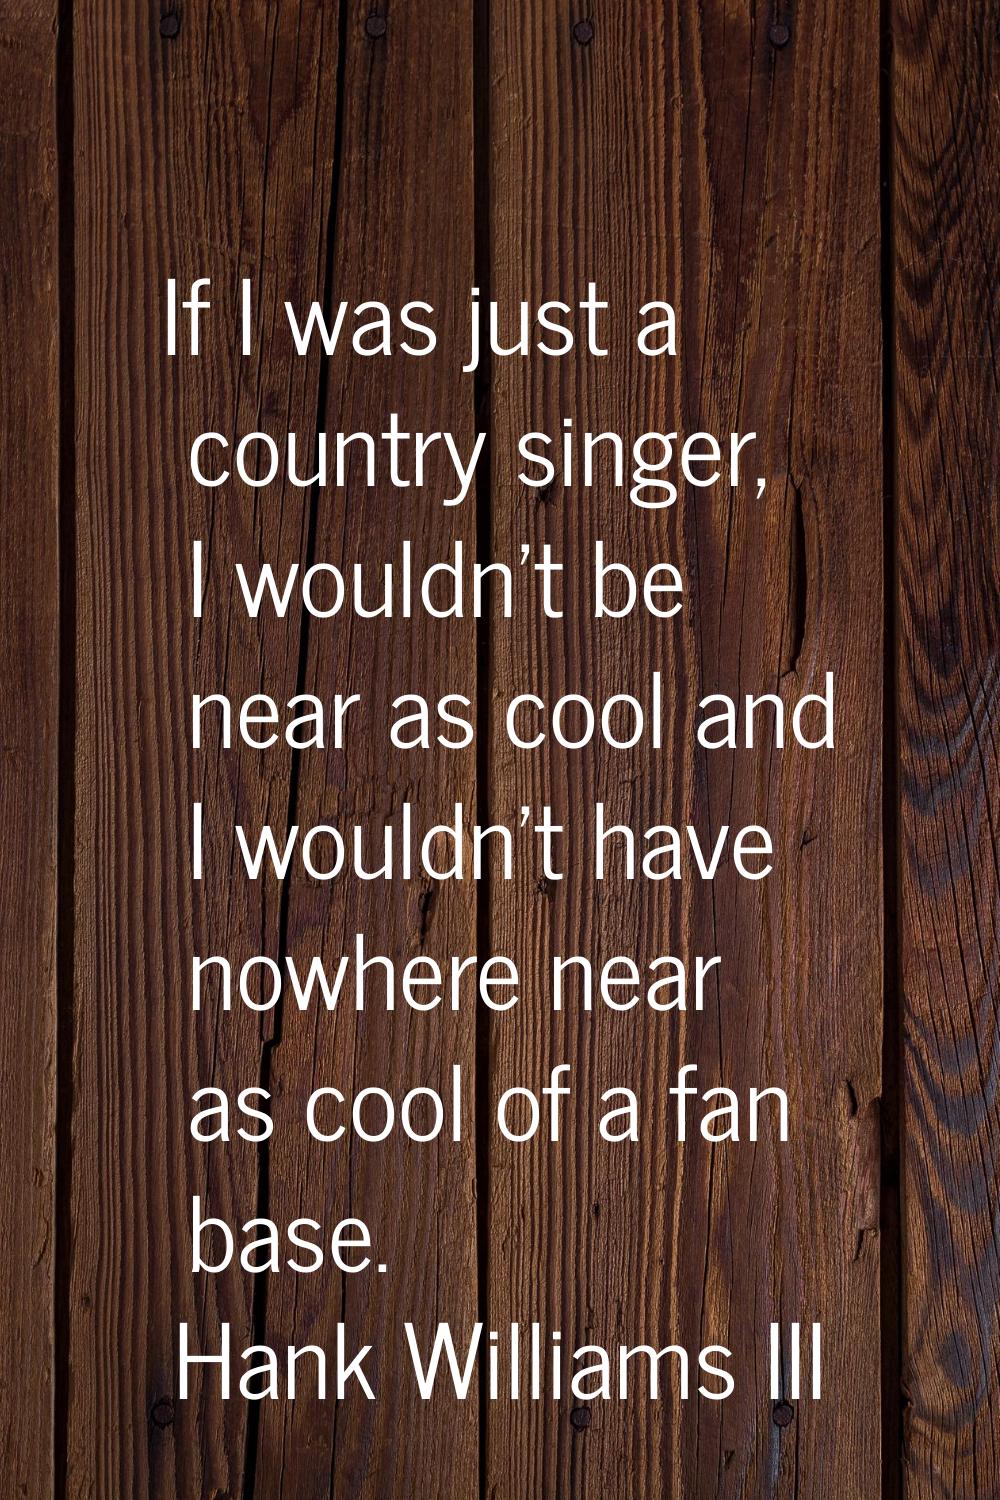 If I was just a country singer, I wouldn't be near as cool and I wouldn't have nowhere near as cool